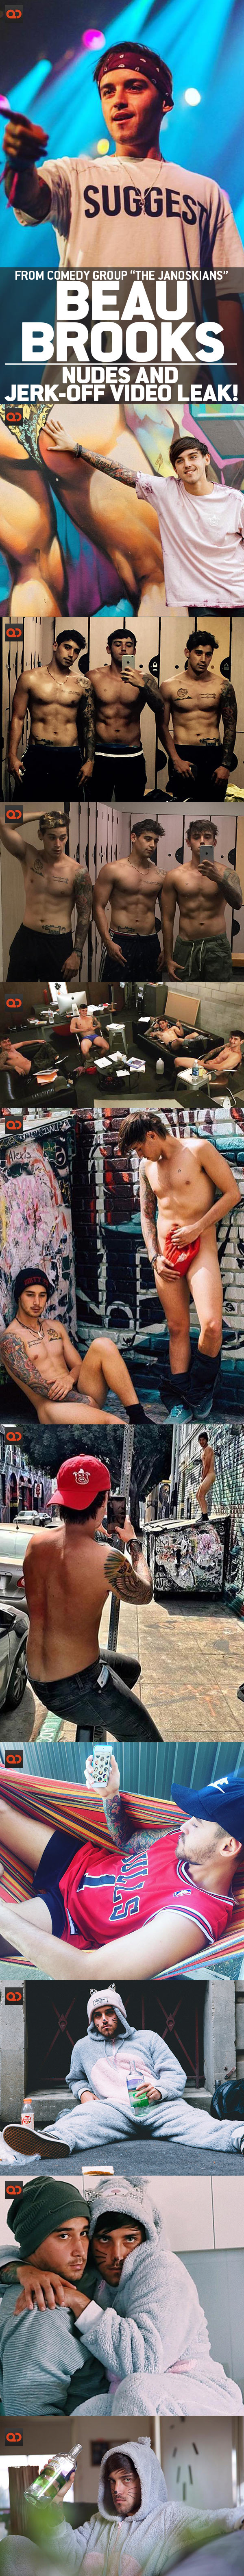 Beau Brooks, From Comedy Group “The Janoskians”, Nudes And Jerk-Off Video Leak!